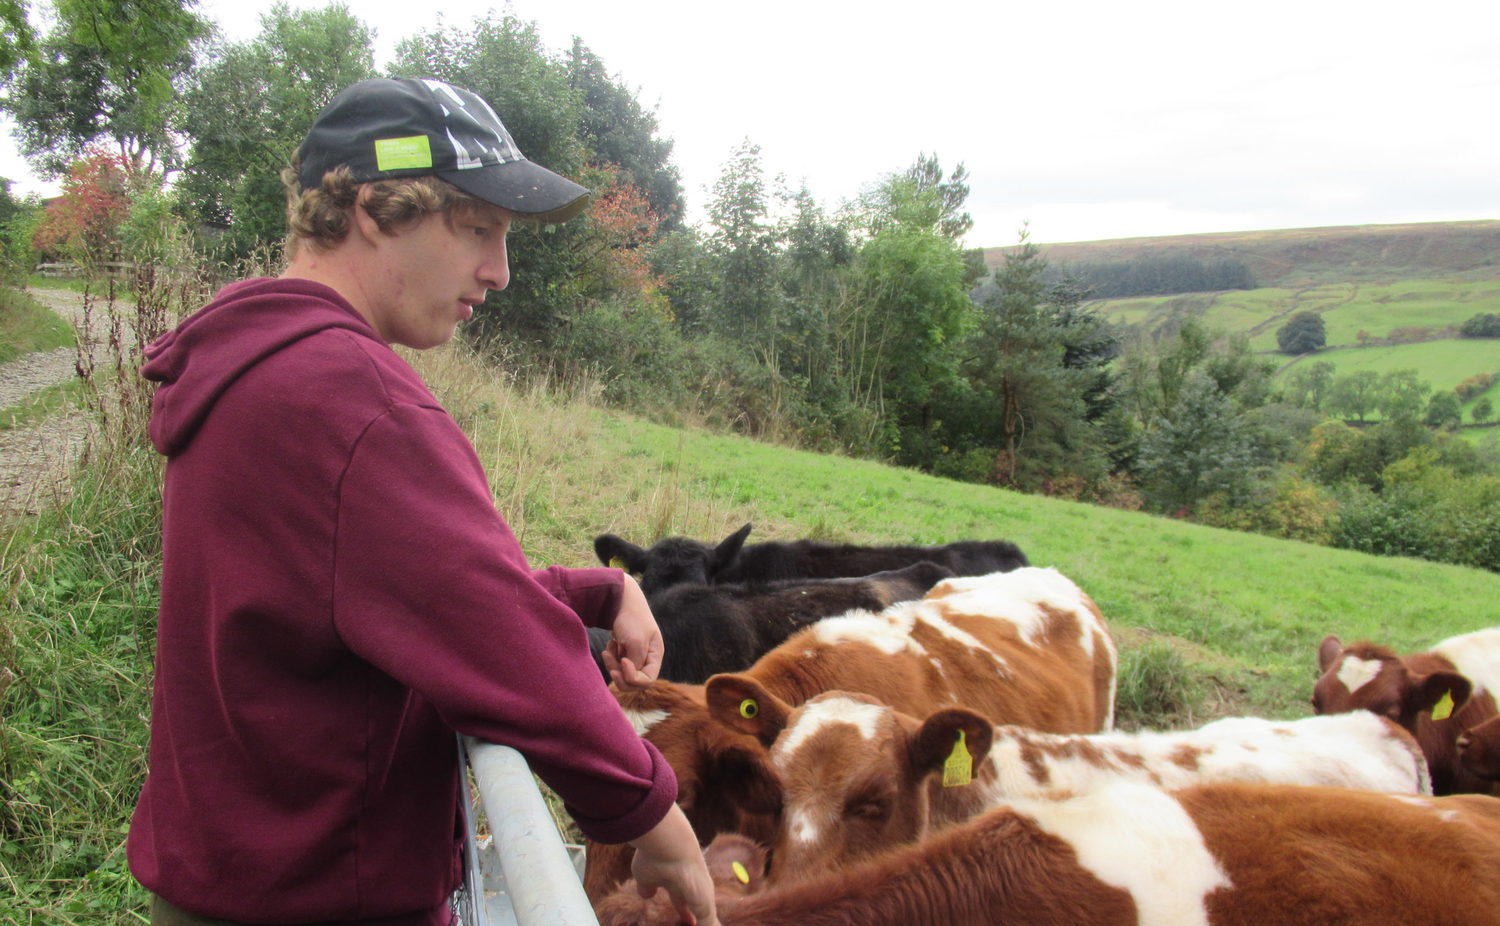 Louis leaning across a gate to stroke the cattle